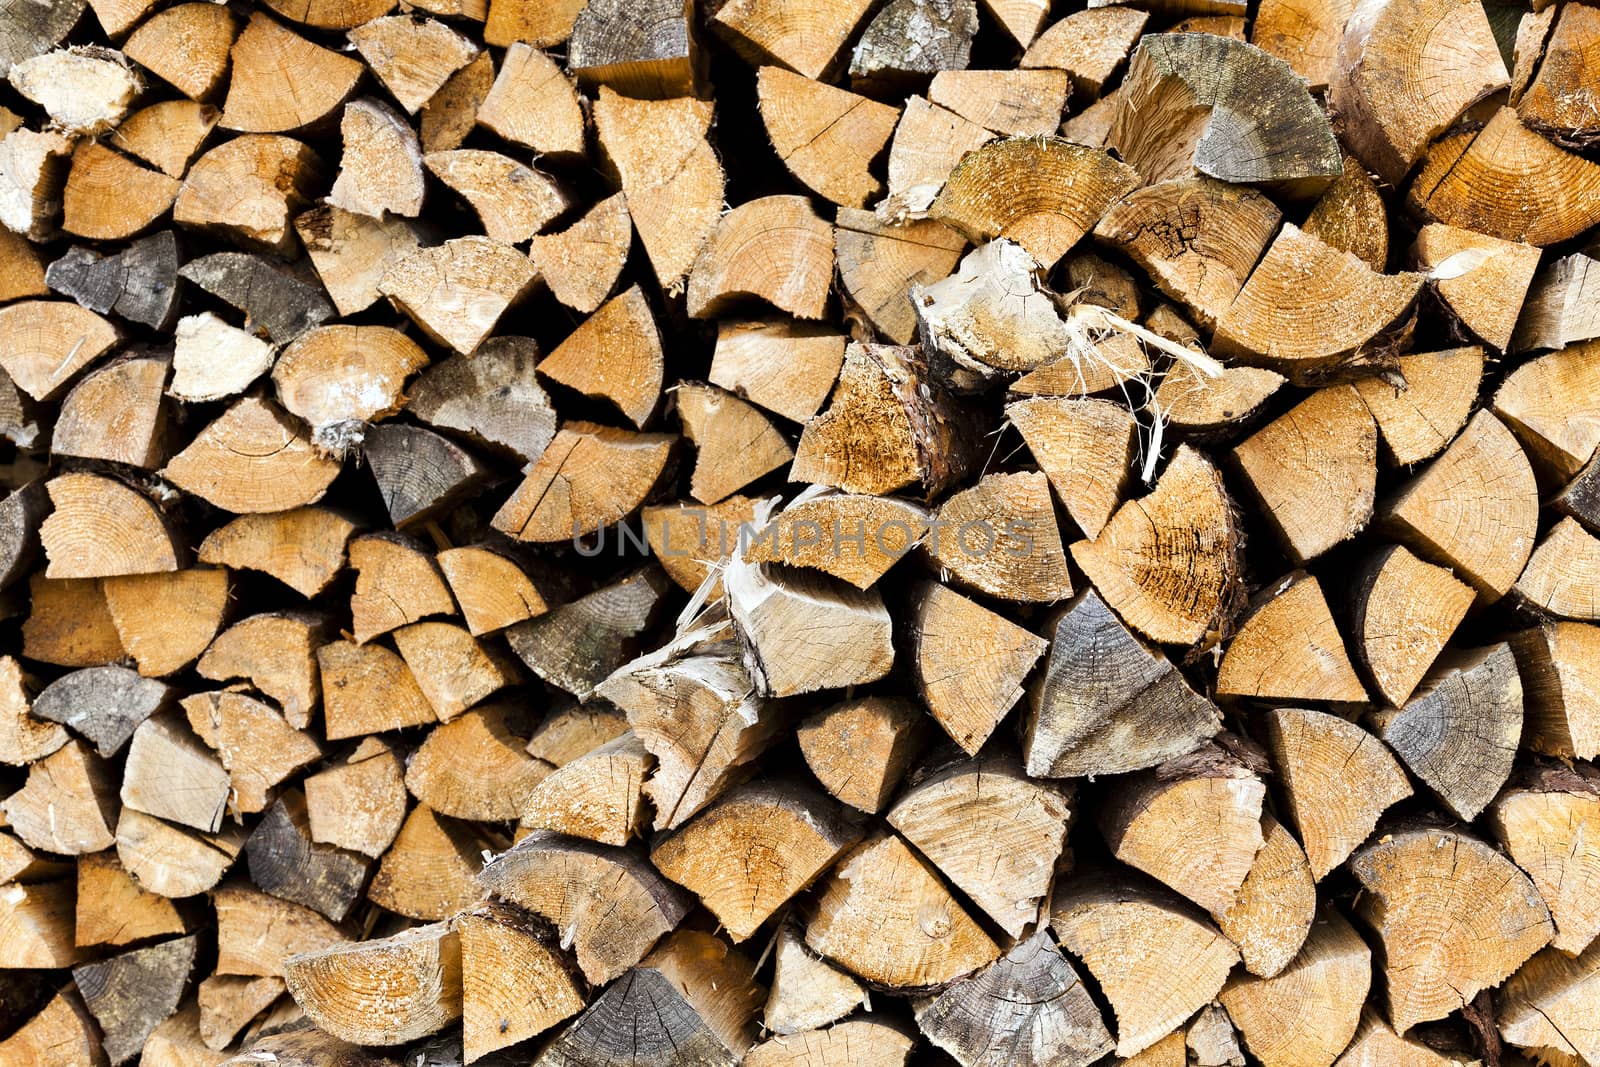   the split firewood photographed by a close up